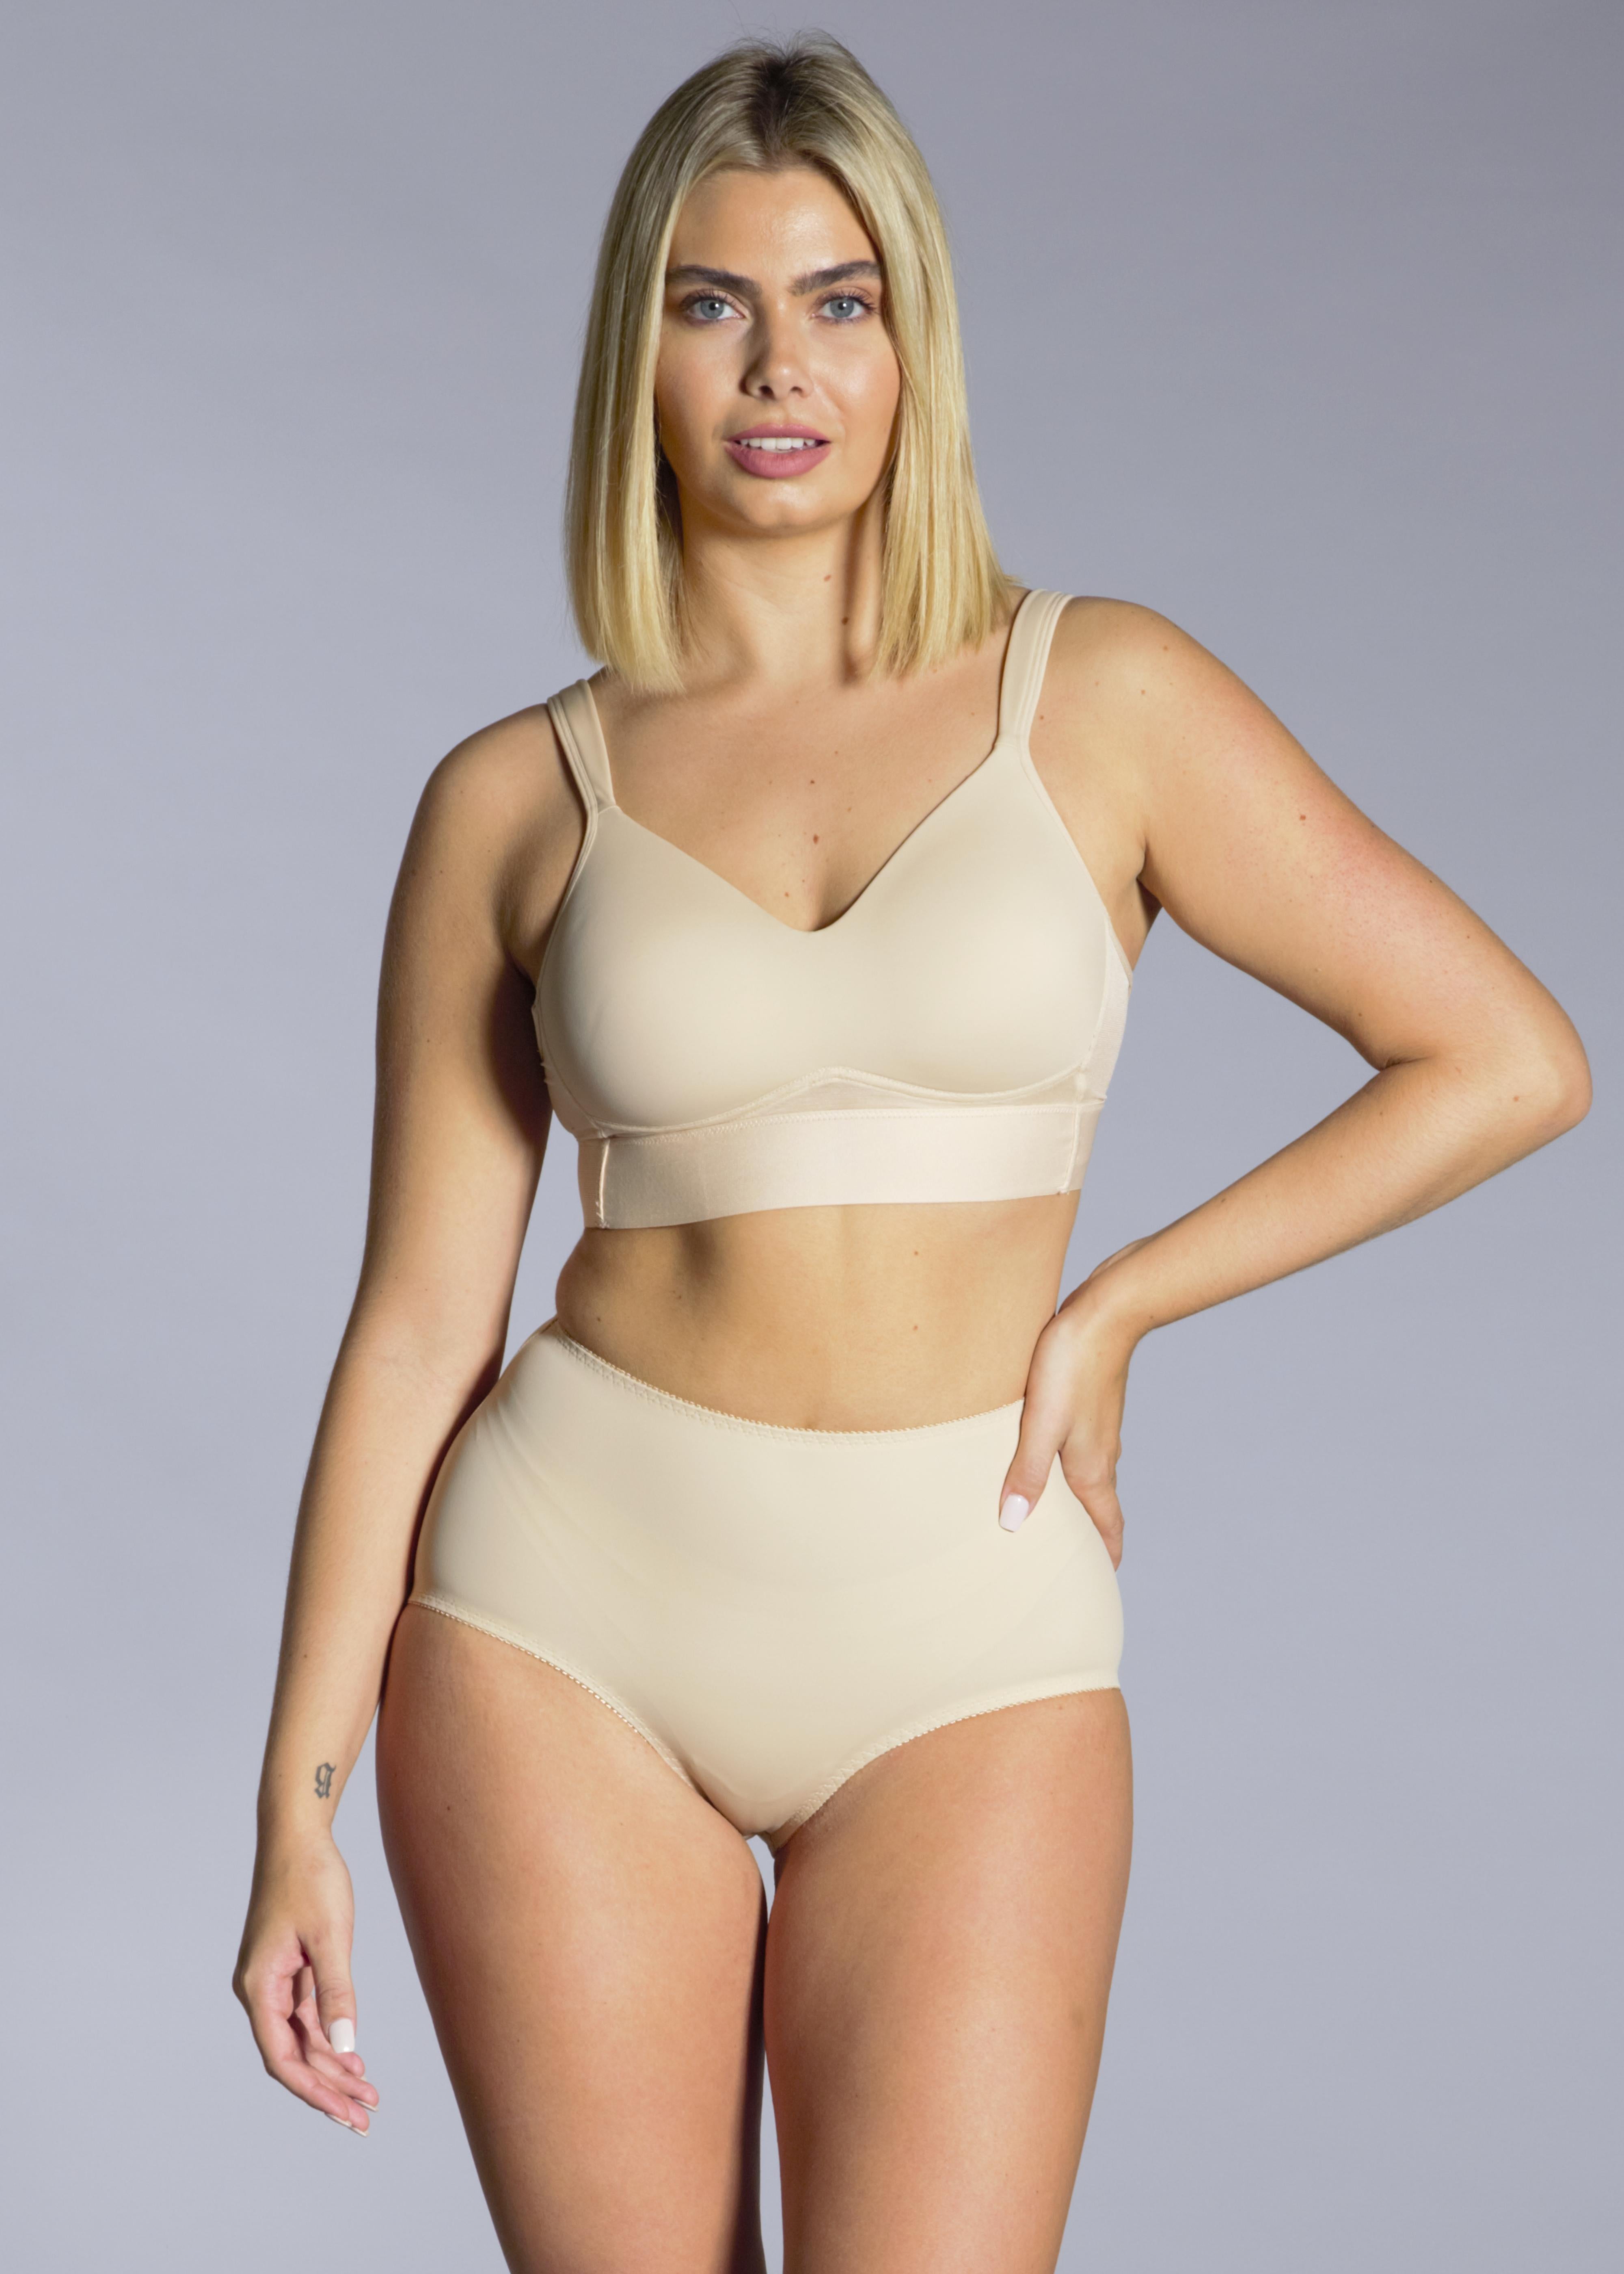 Molded Cup Bra with Mesh Back Detail, Underwear